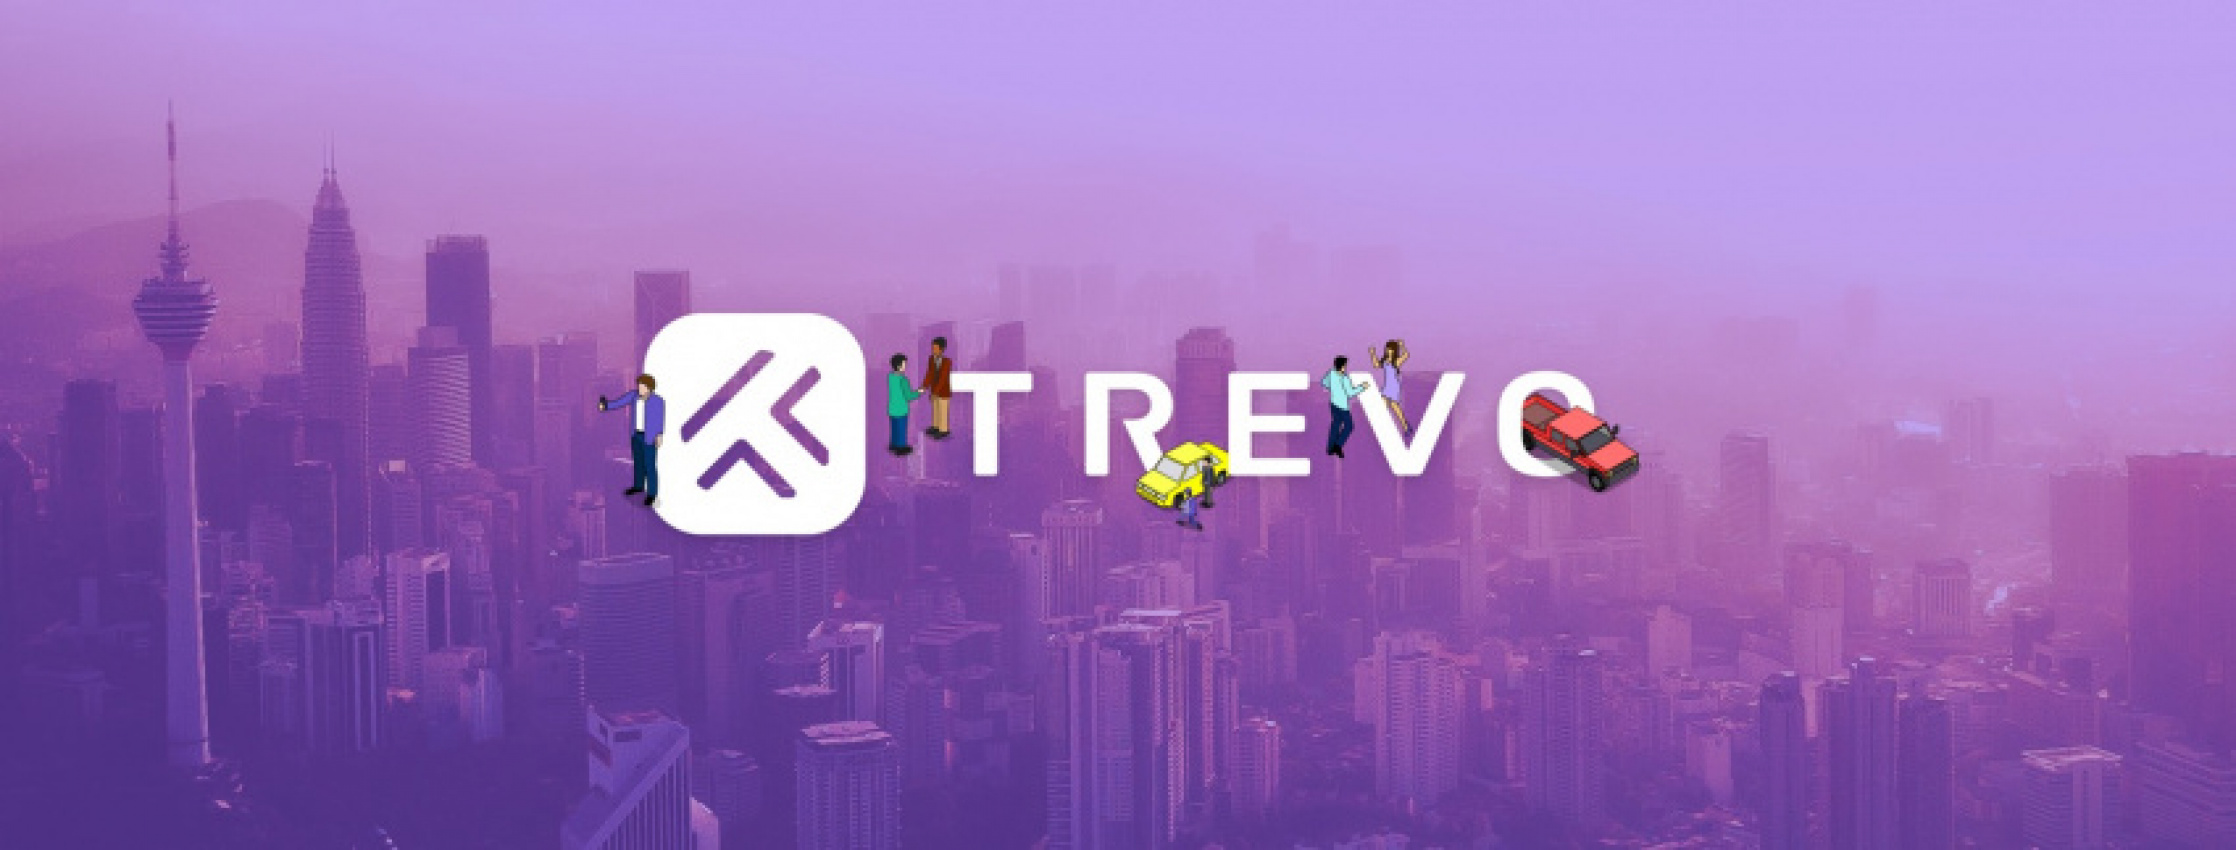 autos, cars, featured, automotive, car sharing, cars, future mobility solutions sdn bhd, malaysia, sk group, sk holdings, socar, socar malaysia, socar mobility malaysia sdn. bhd., trevo, trevo malaysia, trevo : new people-to-people car sharing marketplace in malaysia